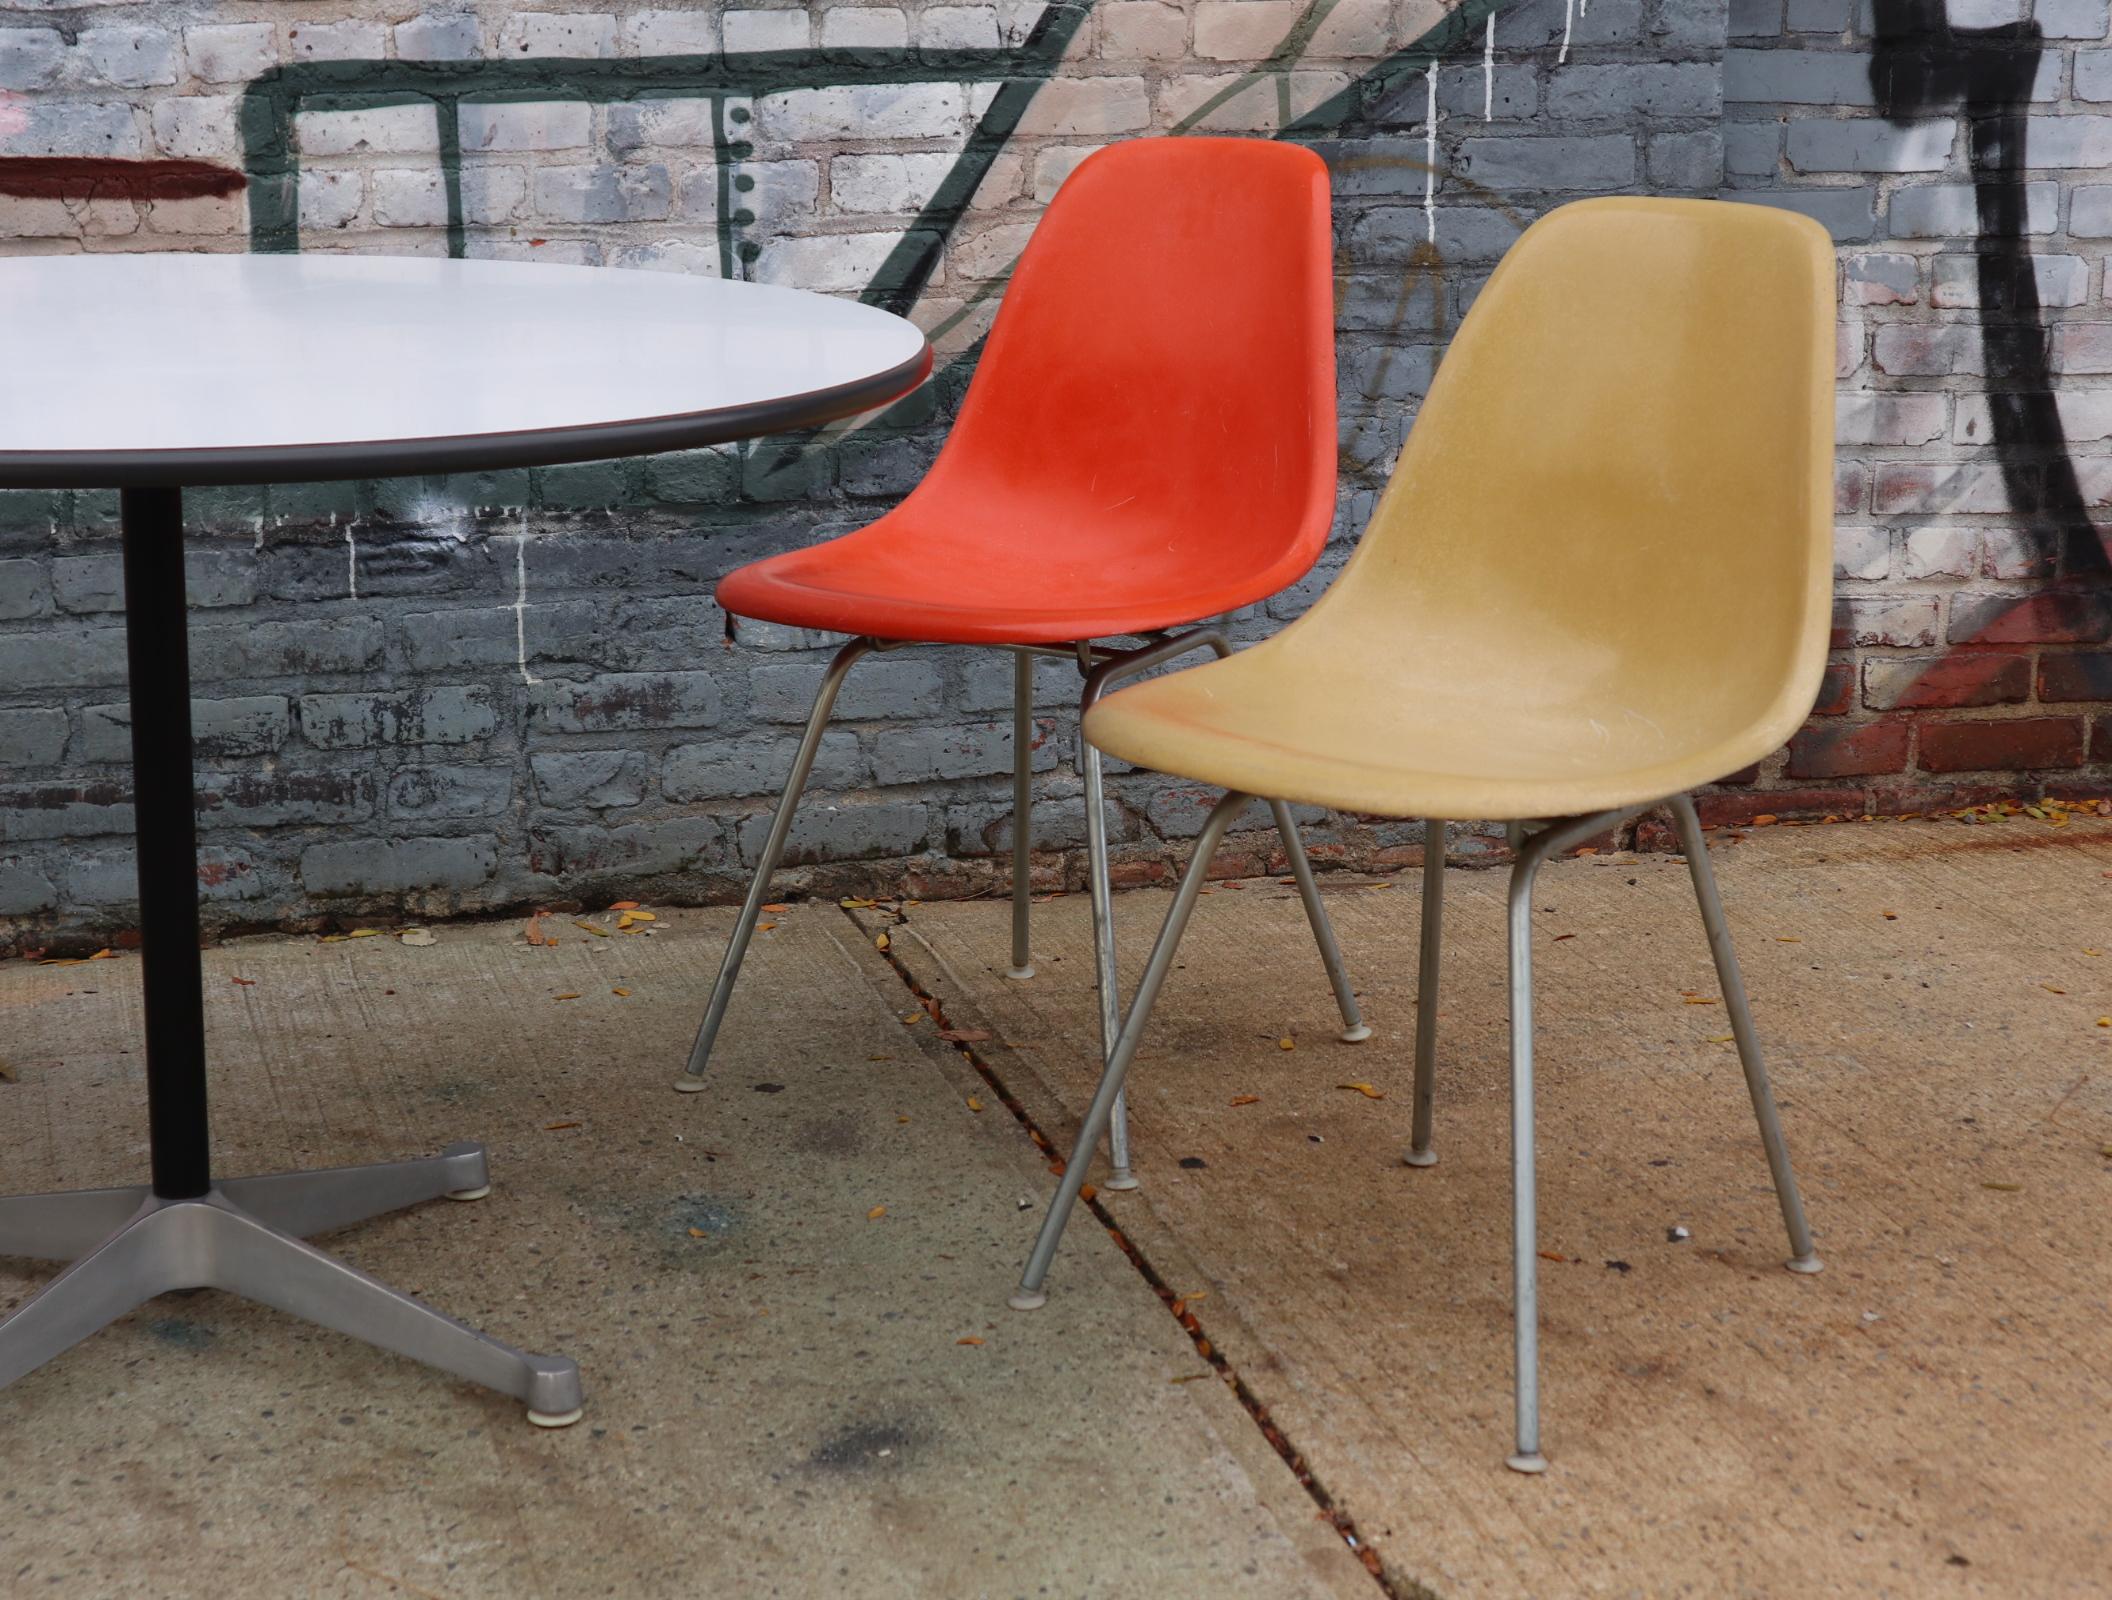 Lovely original Herman Miller Eames dining set. Featuring authentic vintage fiberglass shell chairs in assorted colors and 42 inch diameter dining table. Laminate top in good condition with consistent color. Chairs without cracks or holes. Good